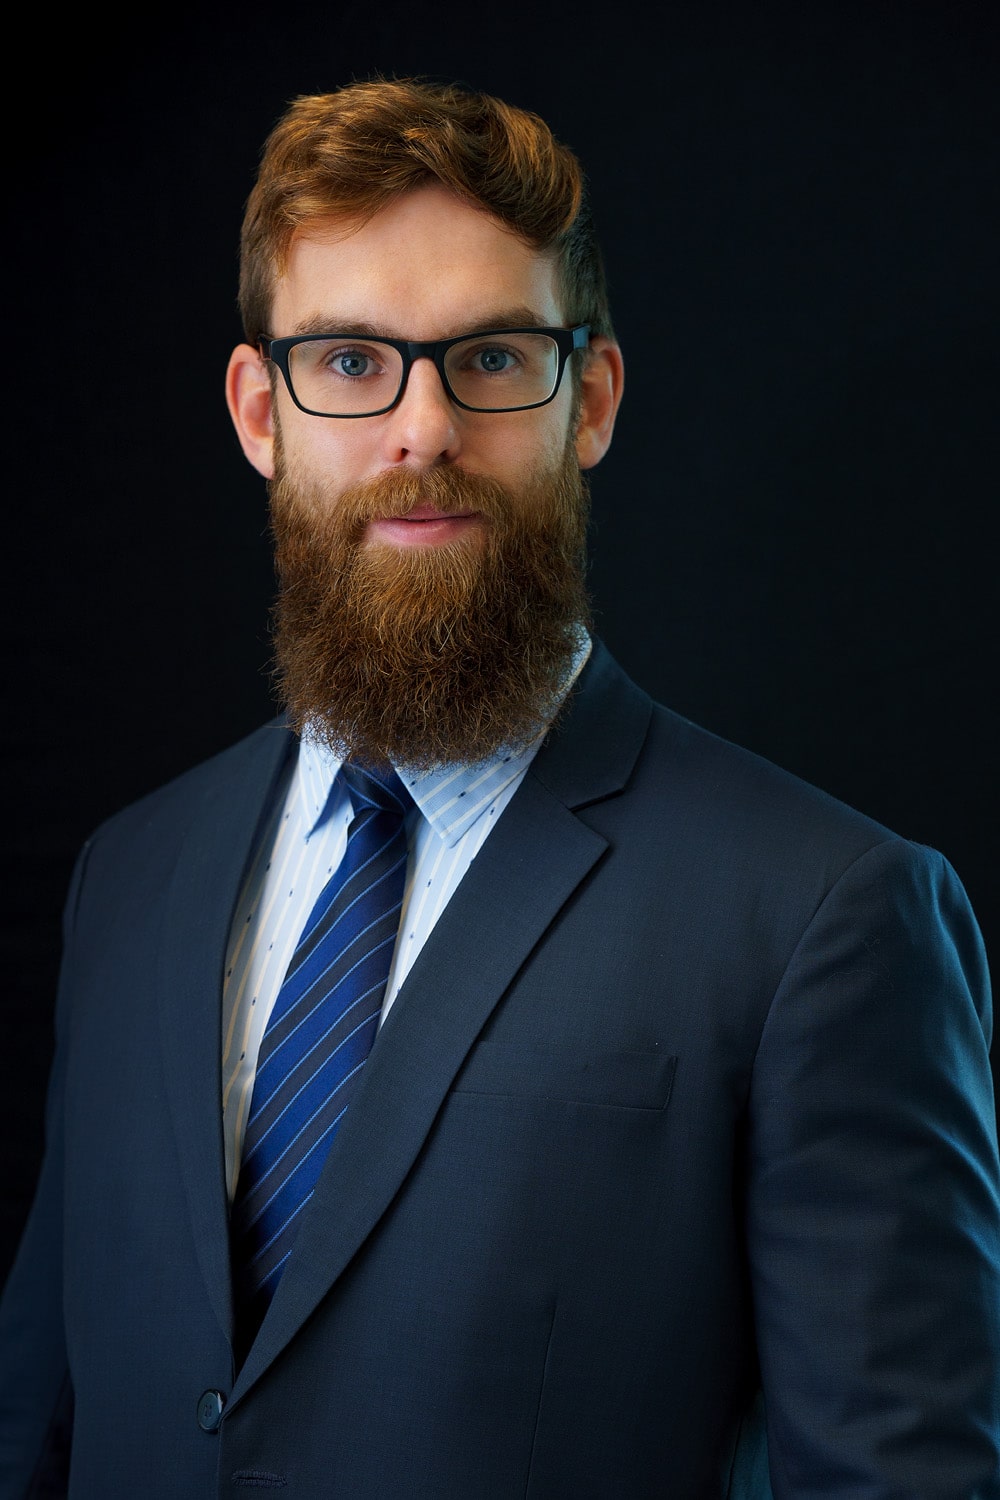 James Cavanagh - Associate at Blumers Personal Injury Lawyers in Perth, WA